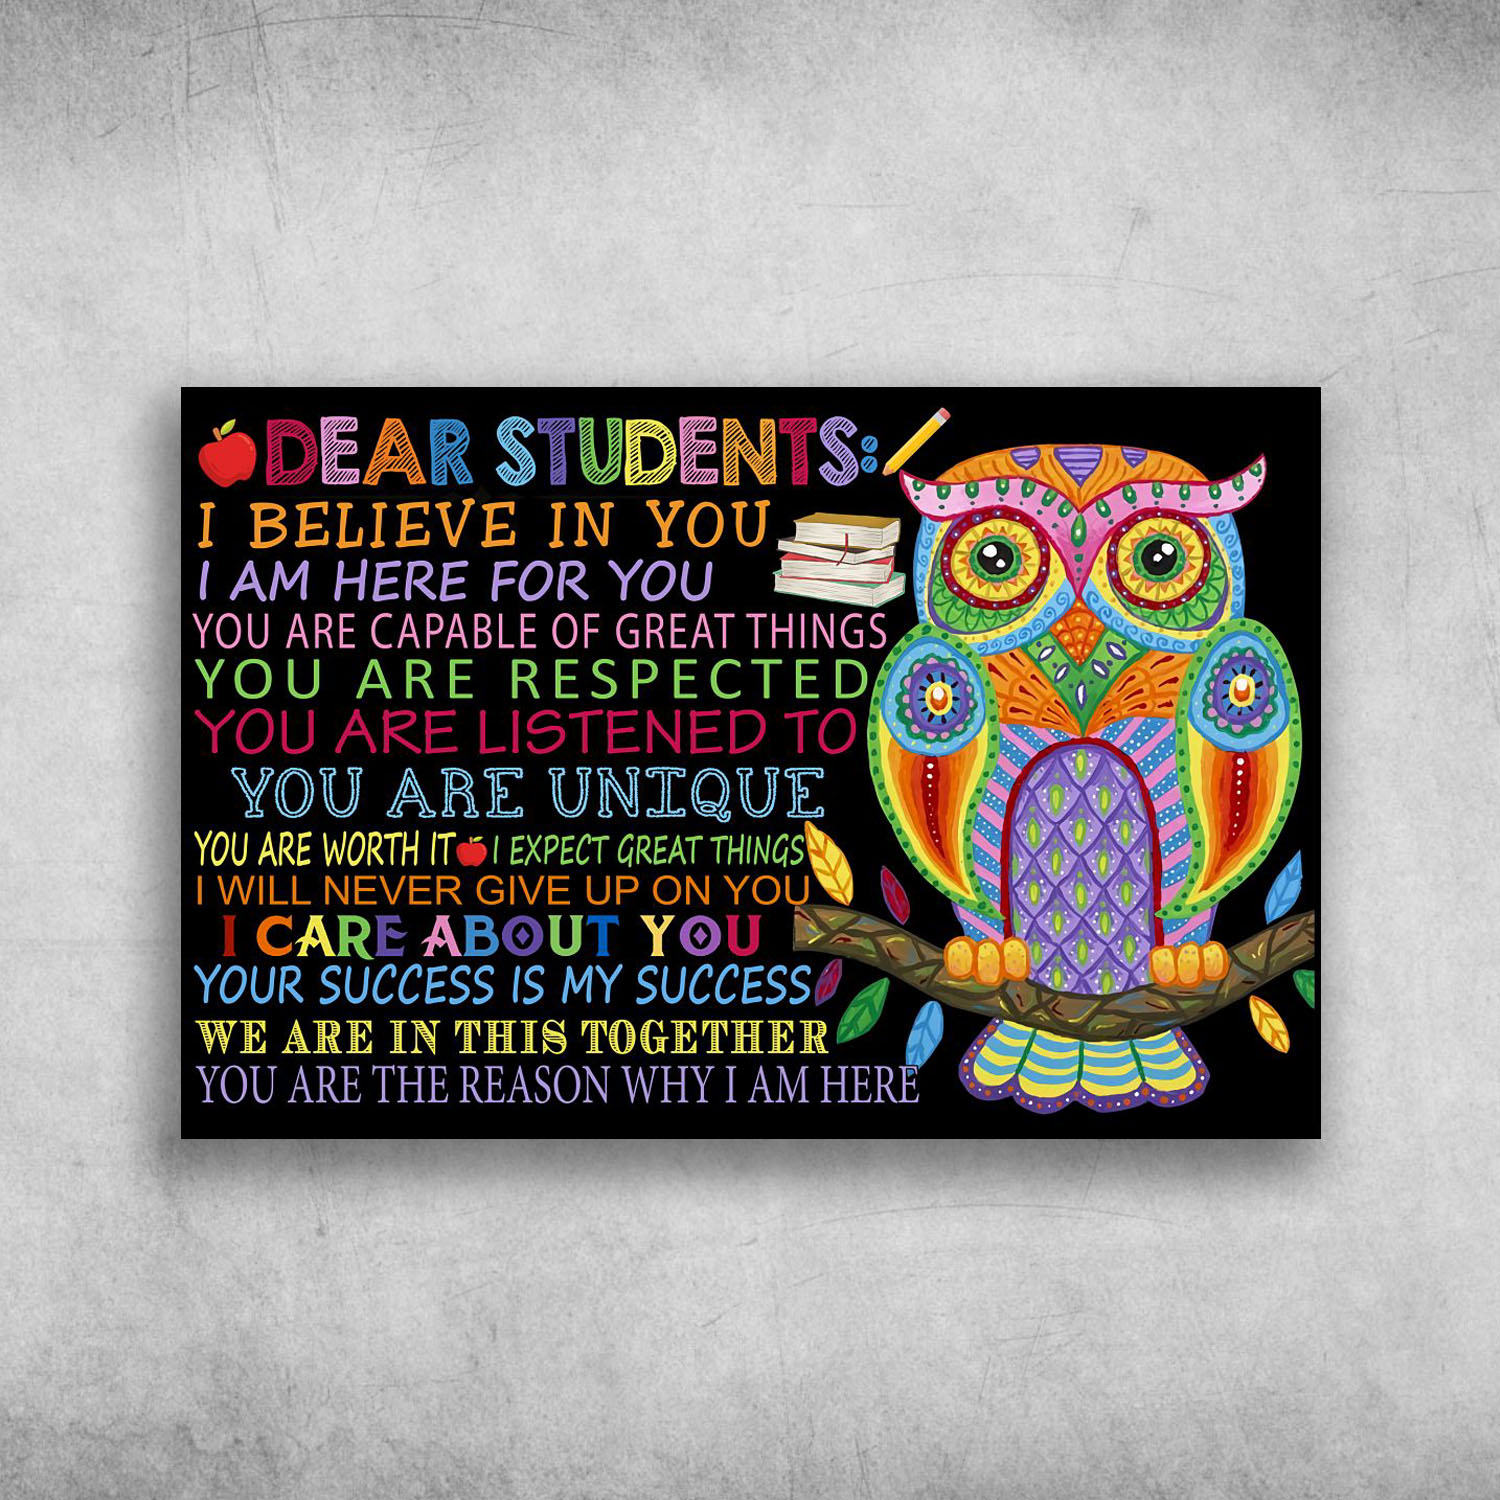 Dear Students I Believe In You I Am Here For You (6)